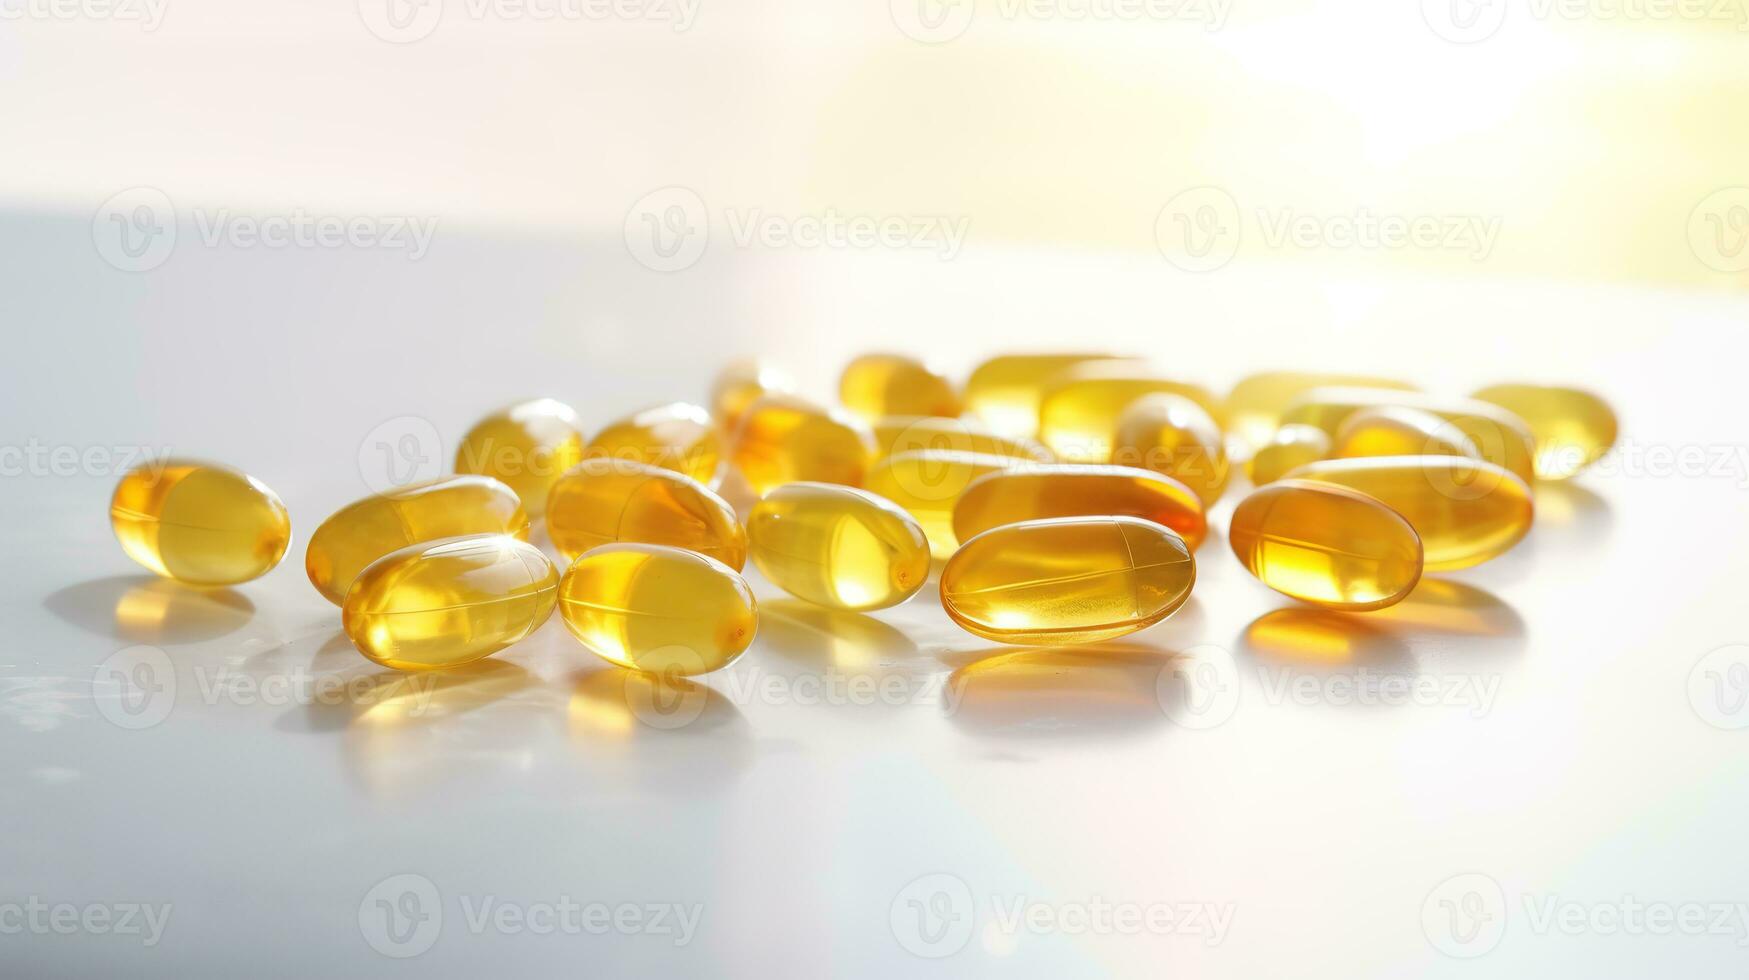 Transparent yellow vitamins on a light background. Vitamin D, omega 3, omega 6, Food supplement oil filled fish oil, vitamin A, vitamin E, flaxseed oil. photo